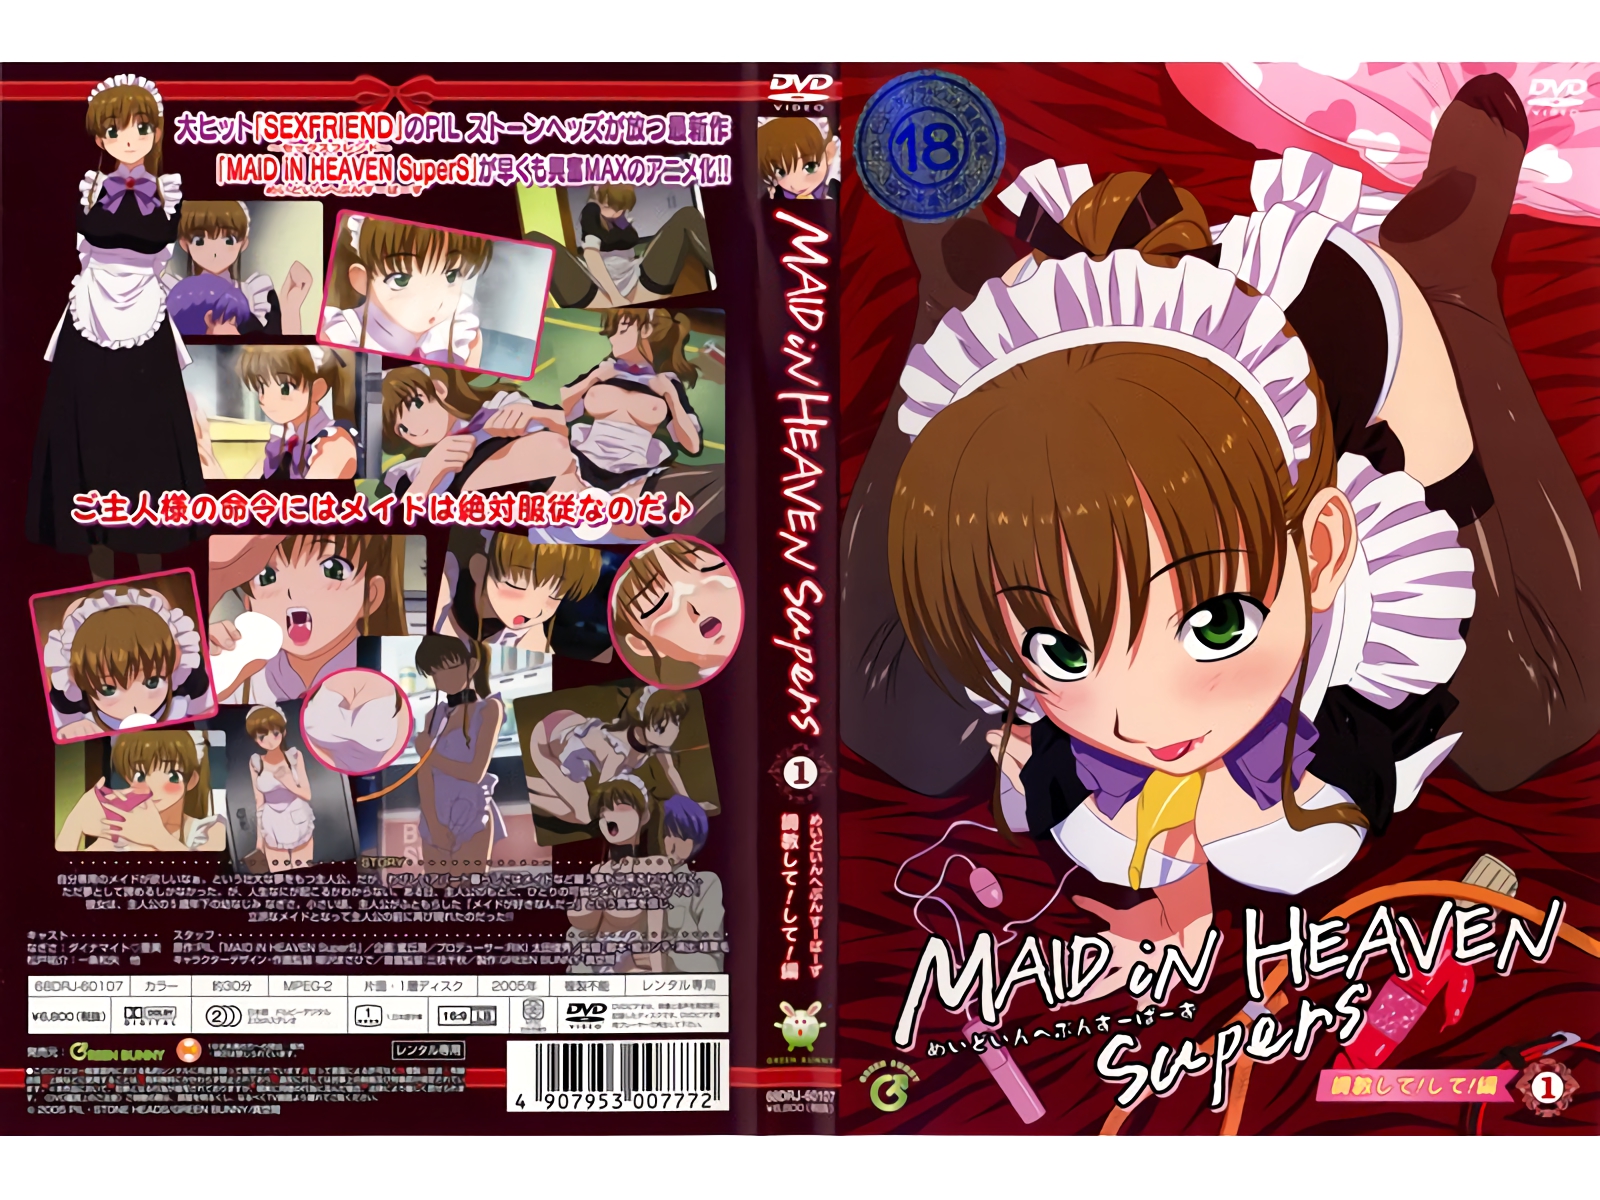 [GREEN BUNNY] MAID iN HEAVEN SuperS 1 调教して！して！编